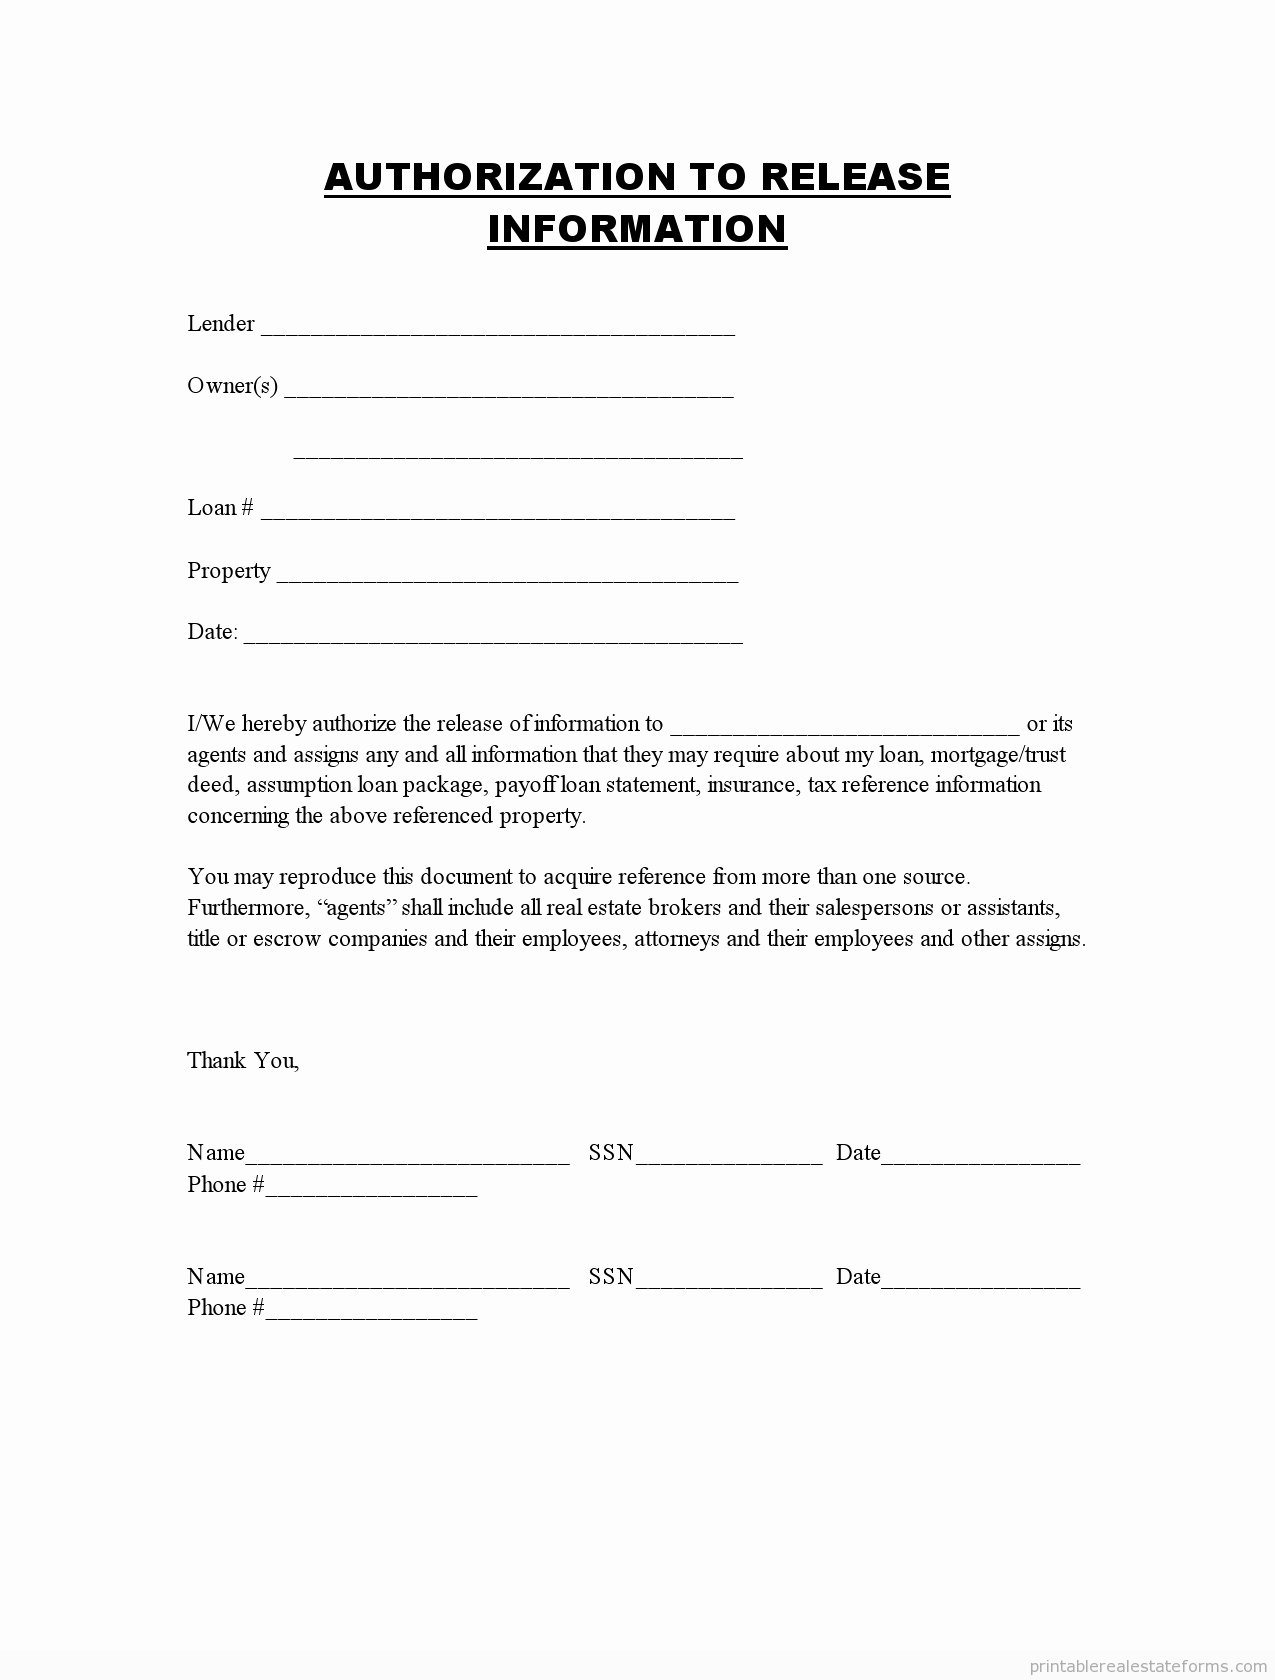 Release Information forms Printable Blank Template